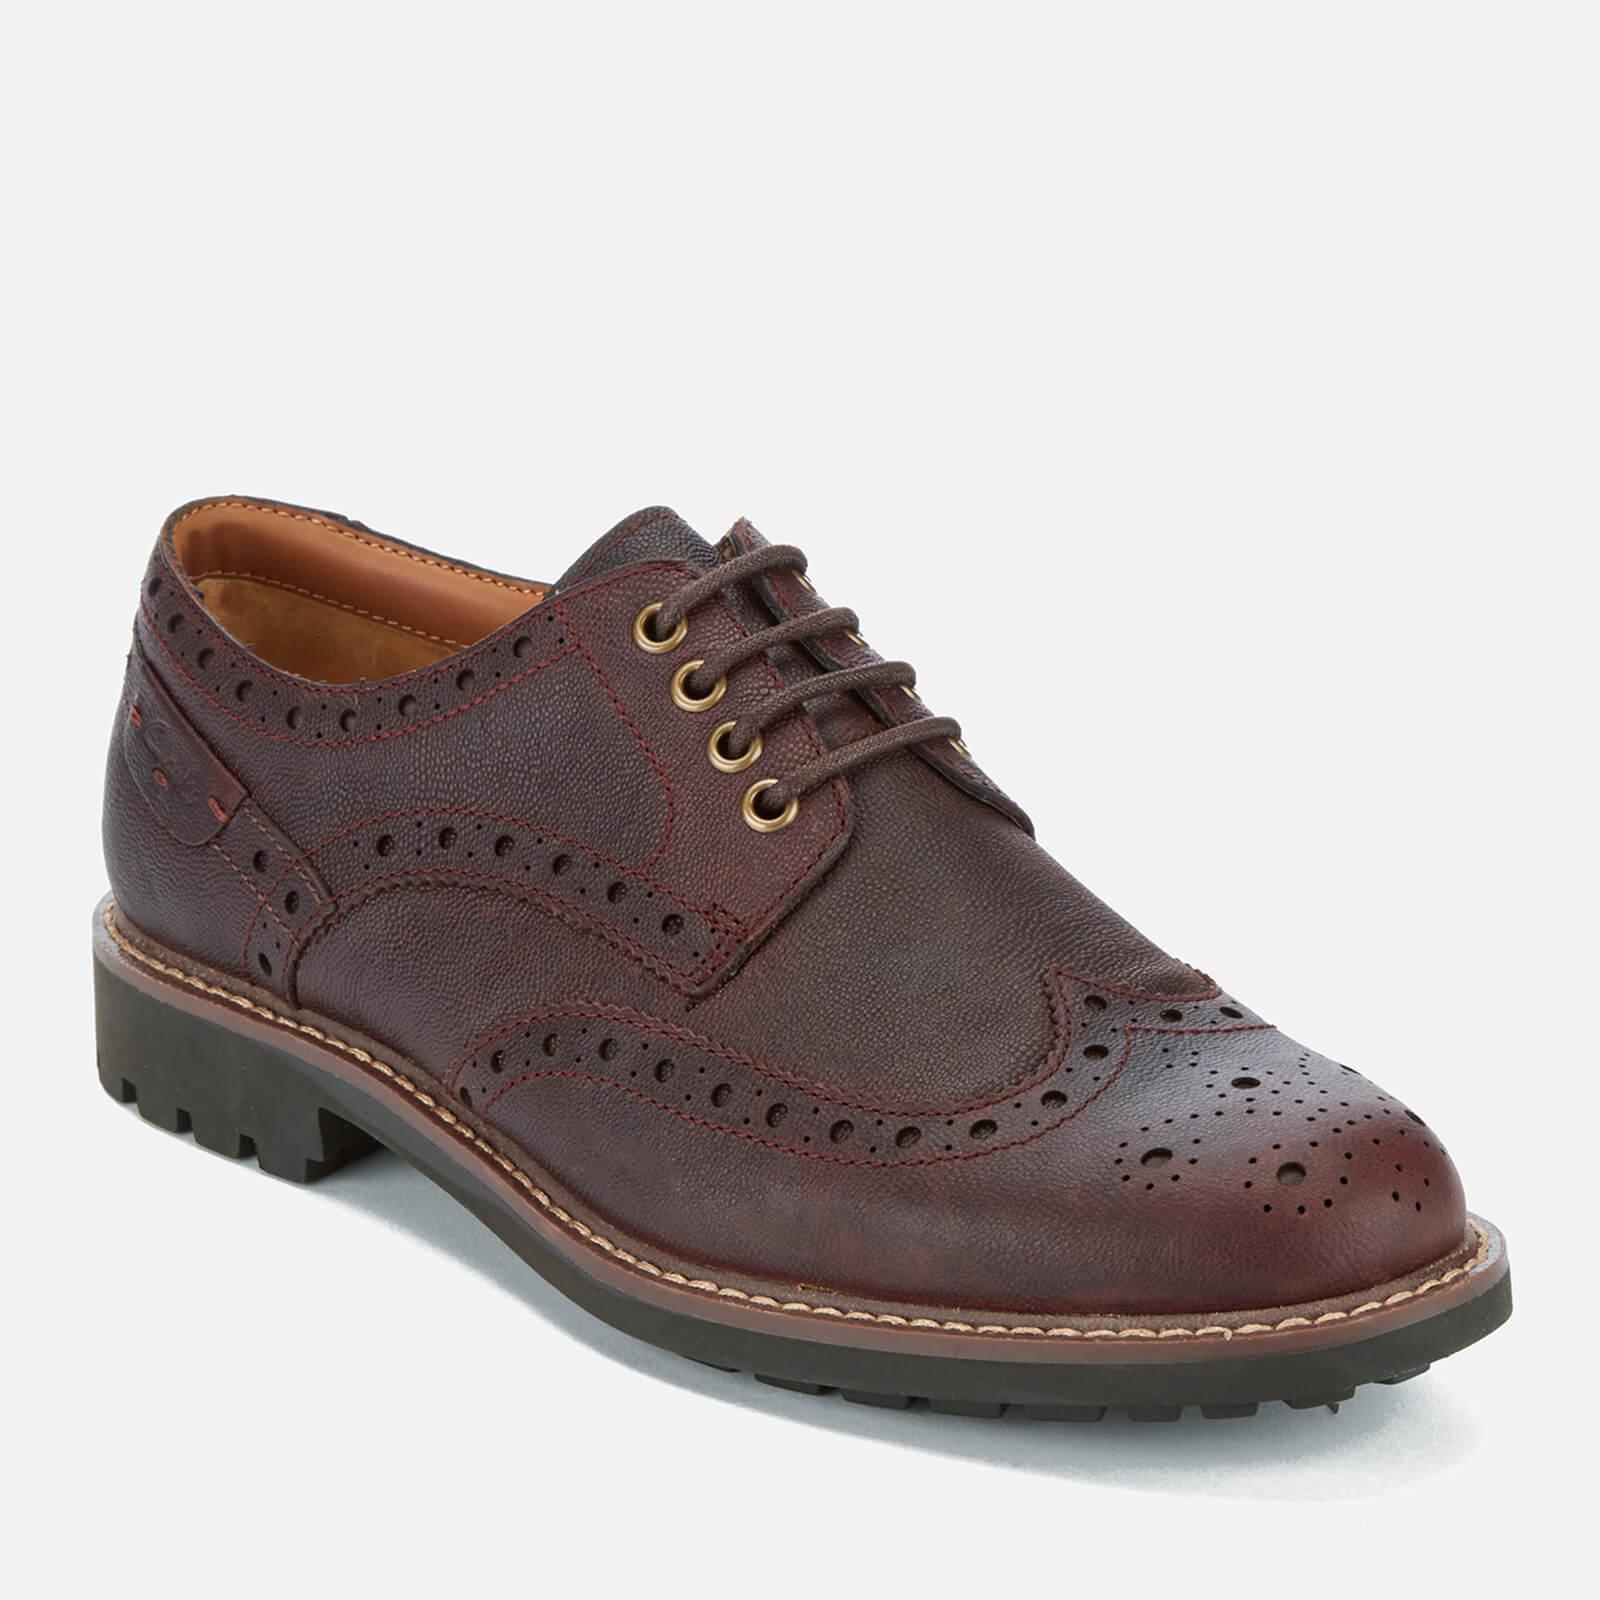 Clarks Leather Montacute Wing Brogues in Brown for Men - Lyst